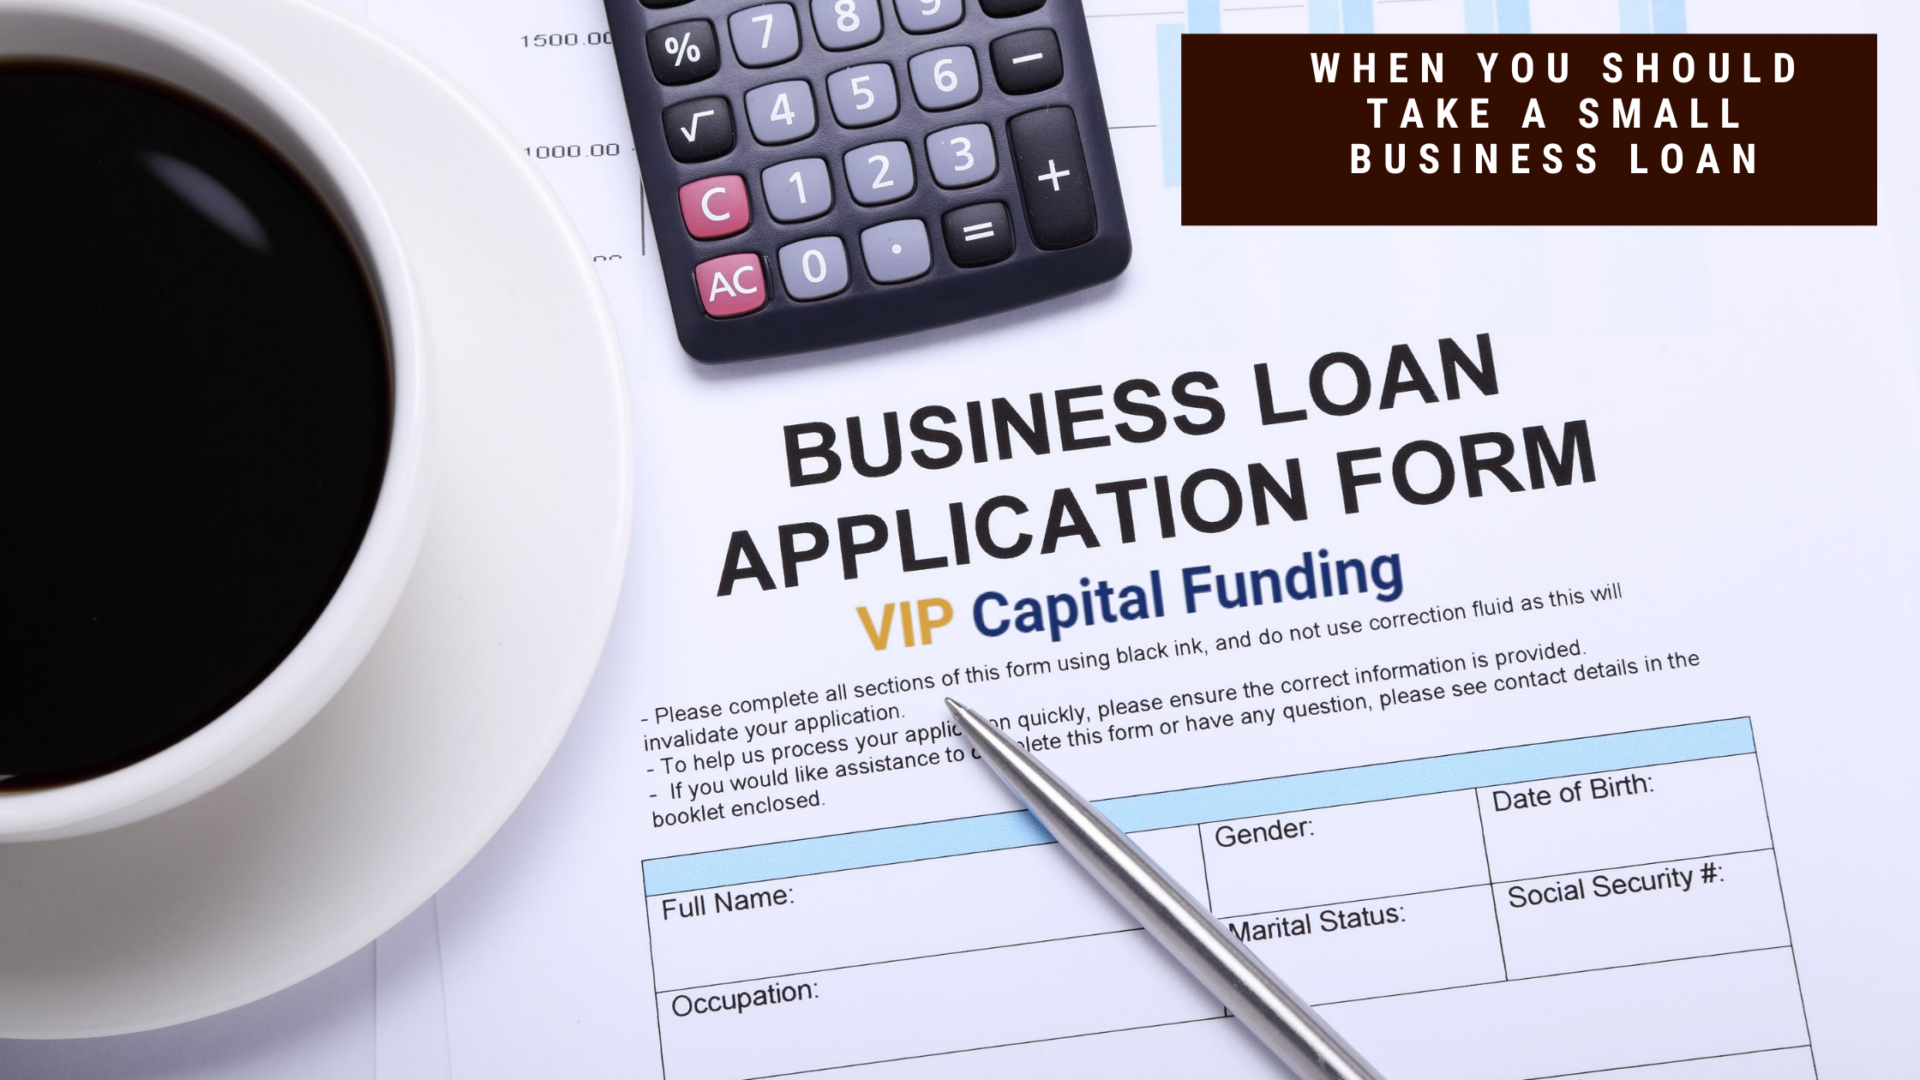 ionlinedesigns: How To Take Out A Small Business Loan